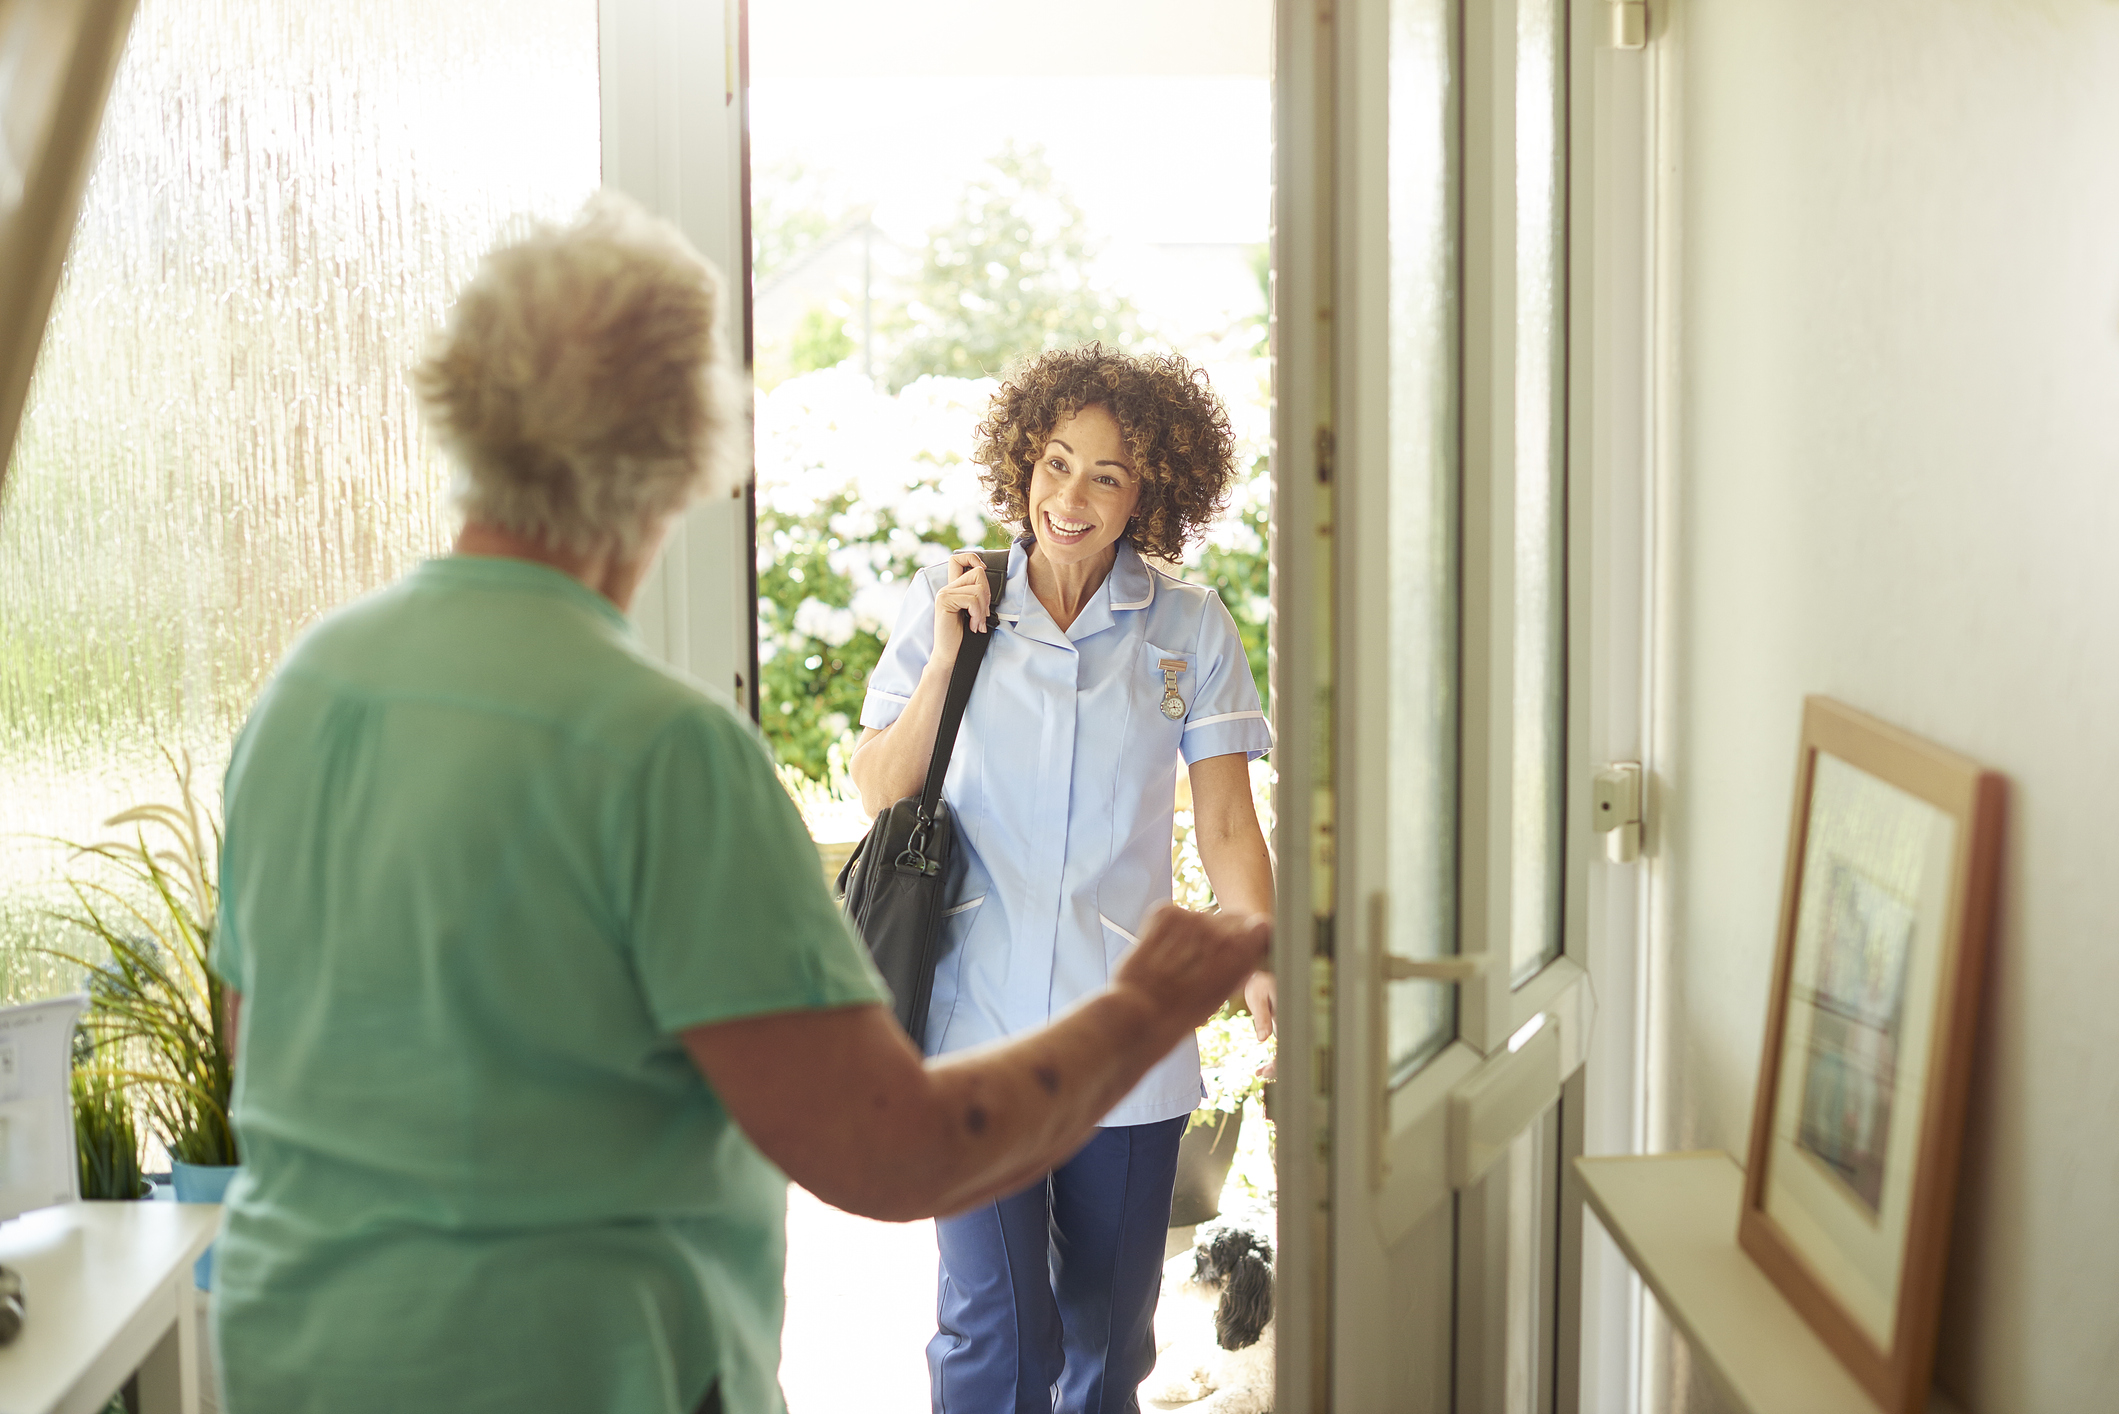 a care worker or medical professional makes a house call to a senior patient at her home . They are standing at the front door as she enters.